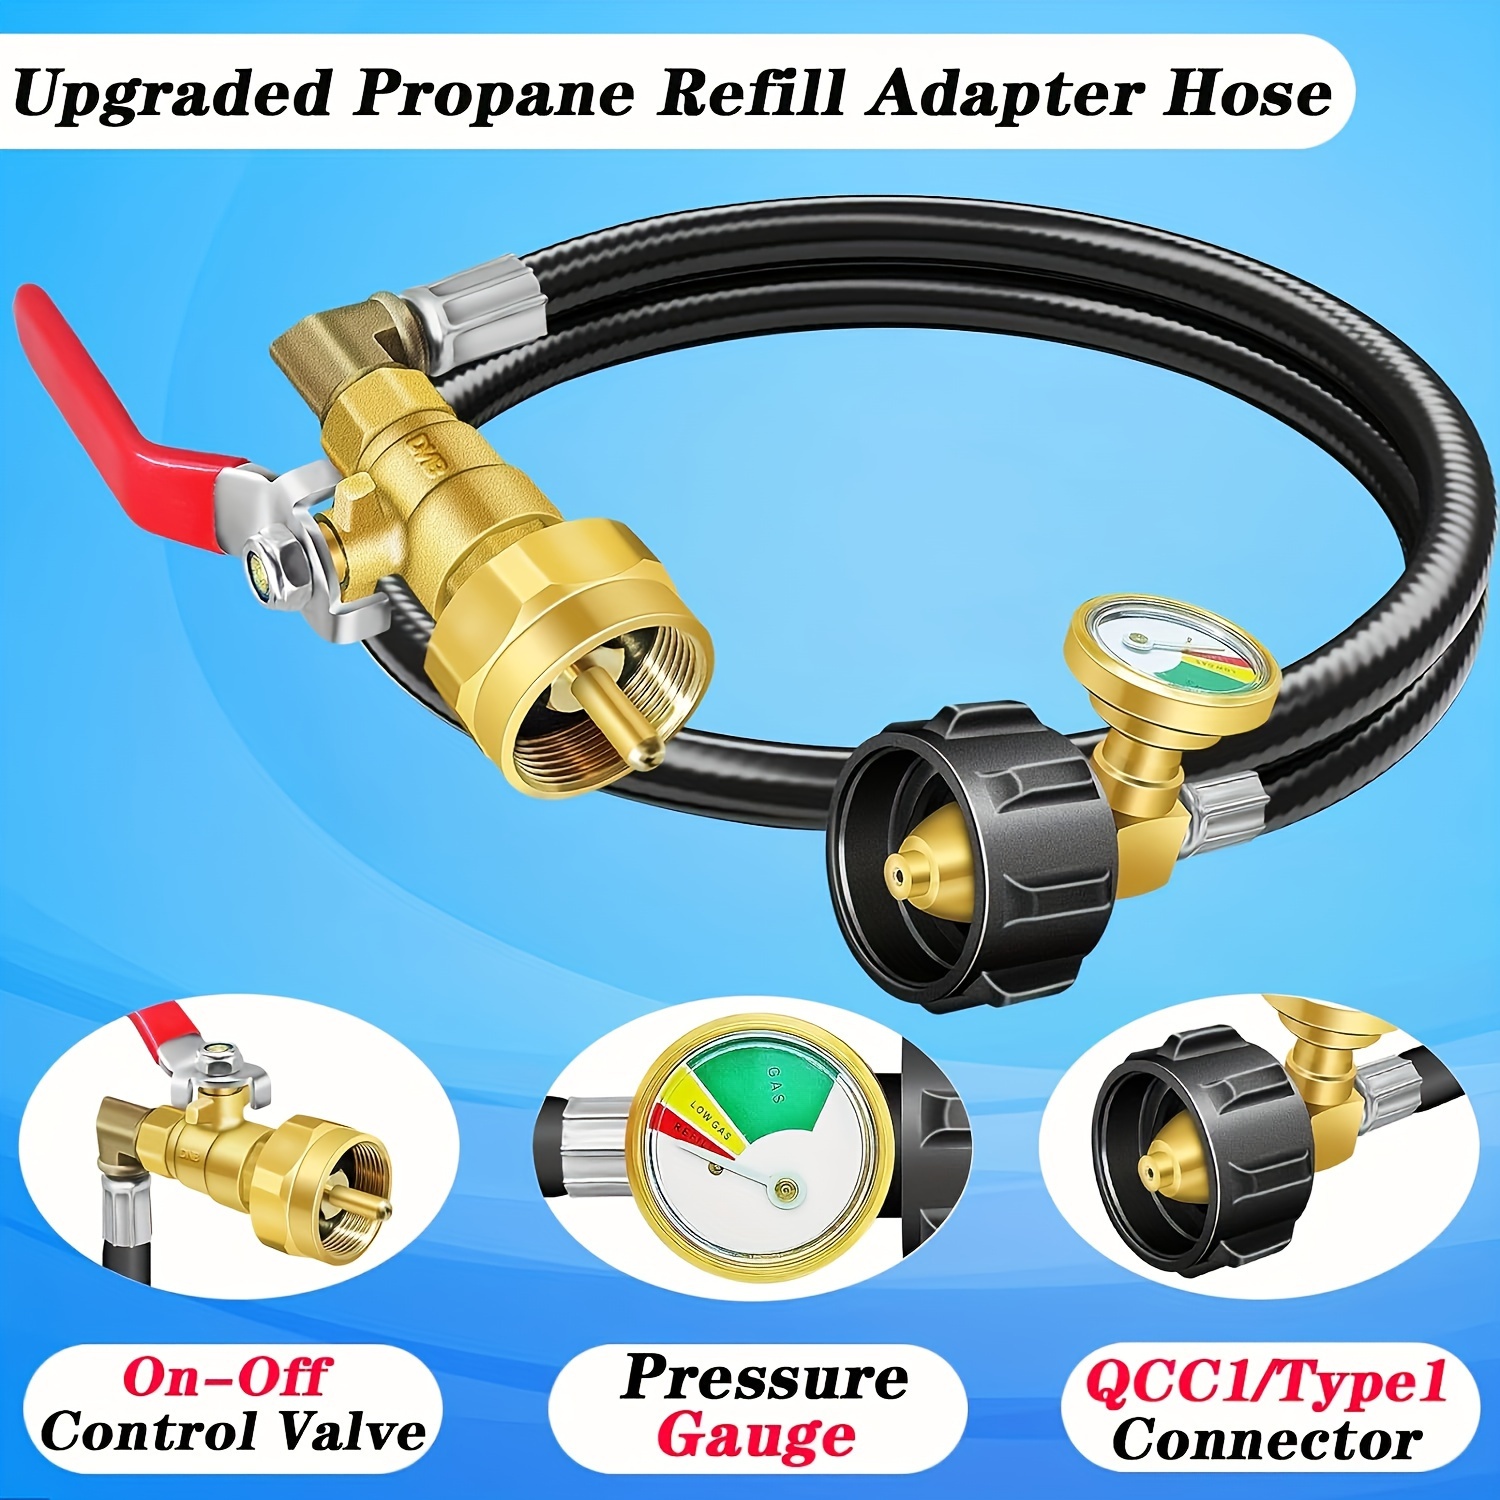 3 feet propane refill adapter hose with gauge and on off control valve extension propane refill hose fill 1 pound bottles from 20lb tank